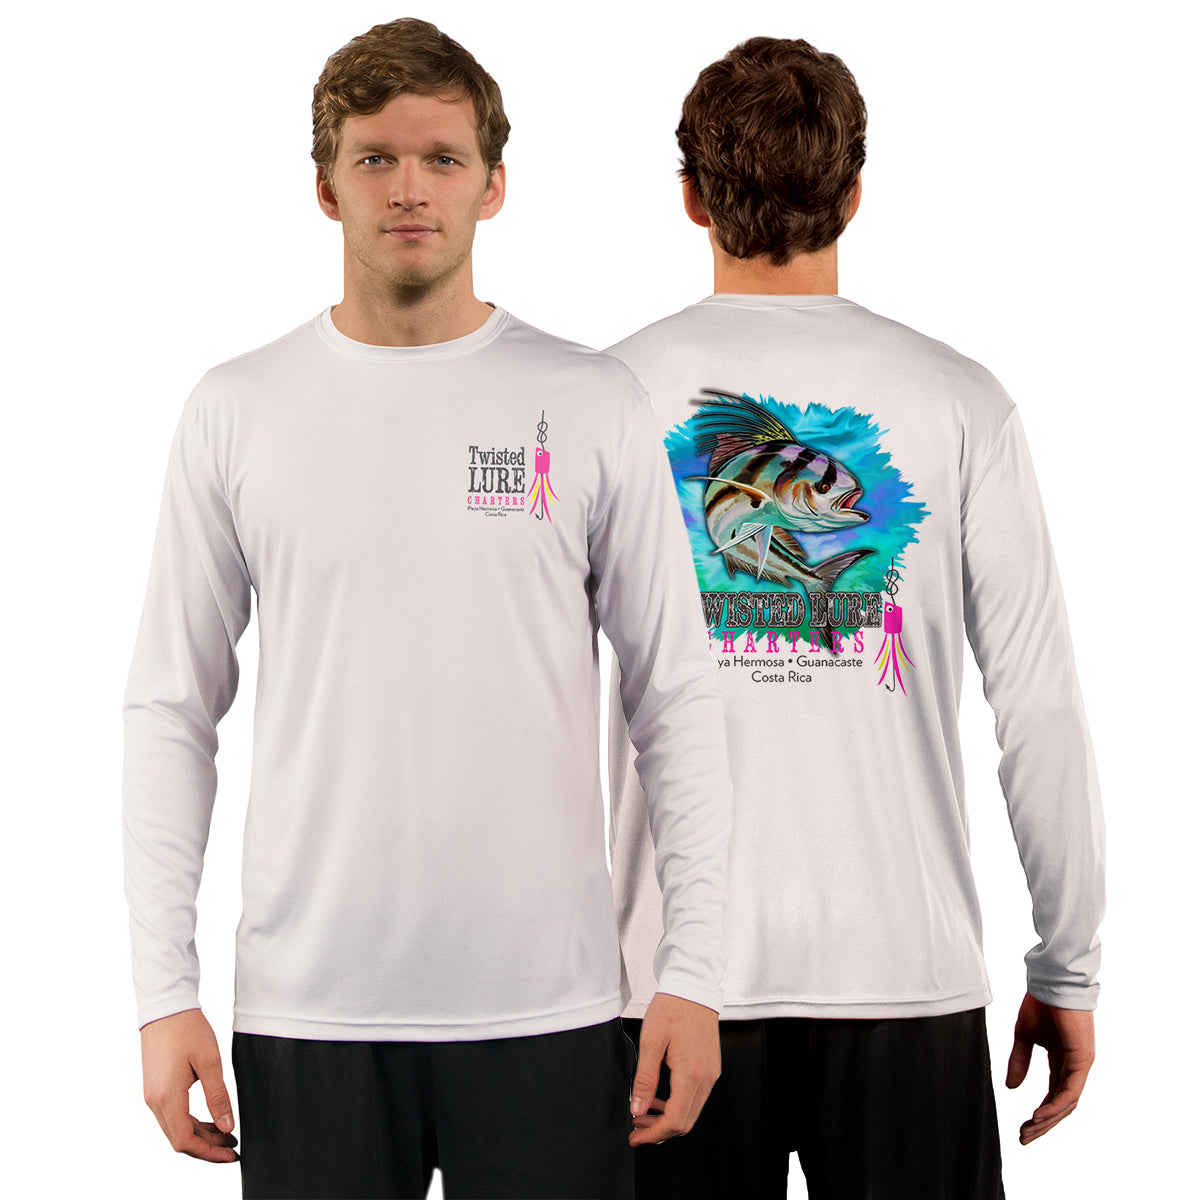 Twisted Lure Charters in Guanacaste, Costa Rica - Performance Shirt - Red  Tuna Shirt Company